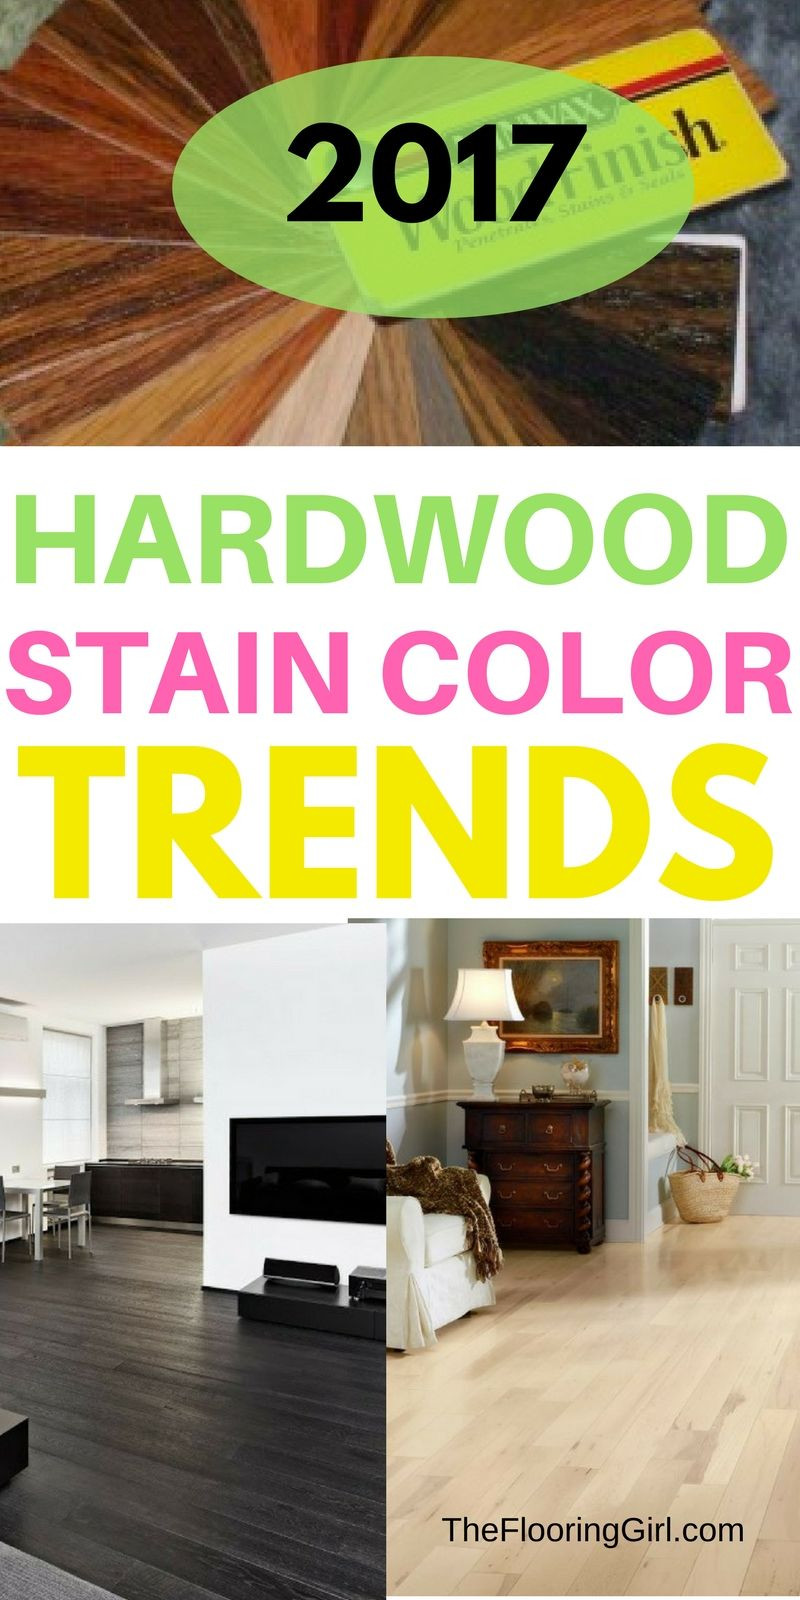 26 Trendy Best Deal Hardwood Floor Molding 2024 free download best deal hardwood floor molding of hardwood flooring stain color trends 2018 more from the flooring with hardwood flooring stain color trends for 2017 hardwood colors that are in style thef